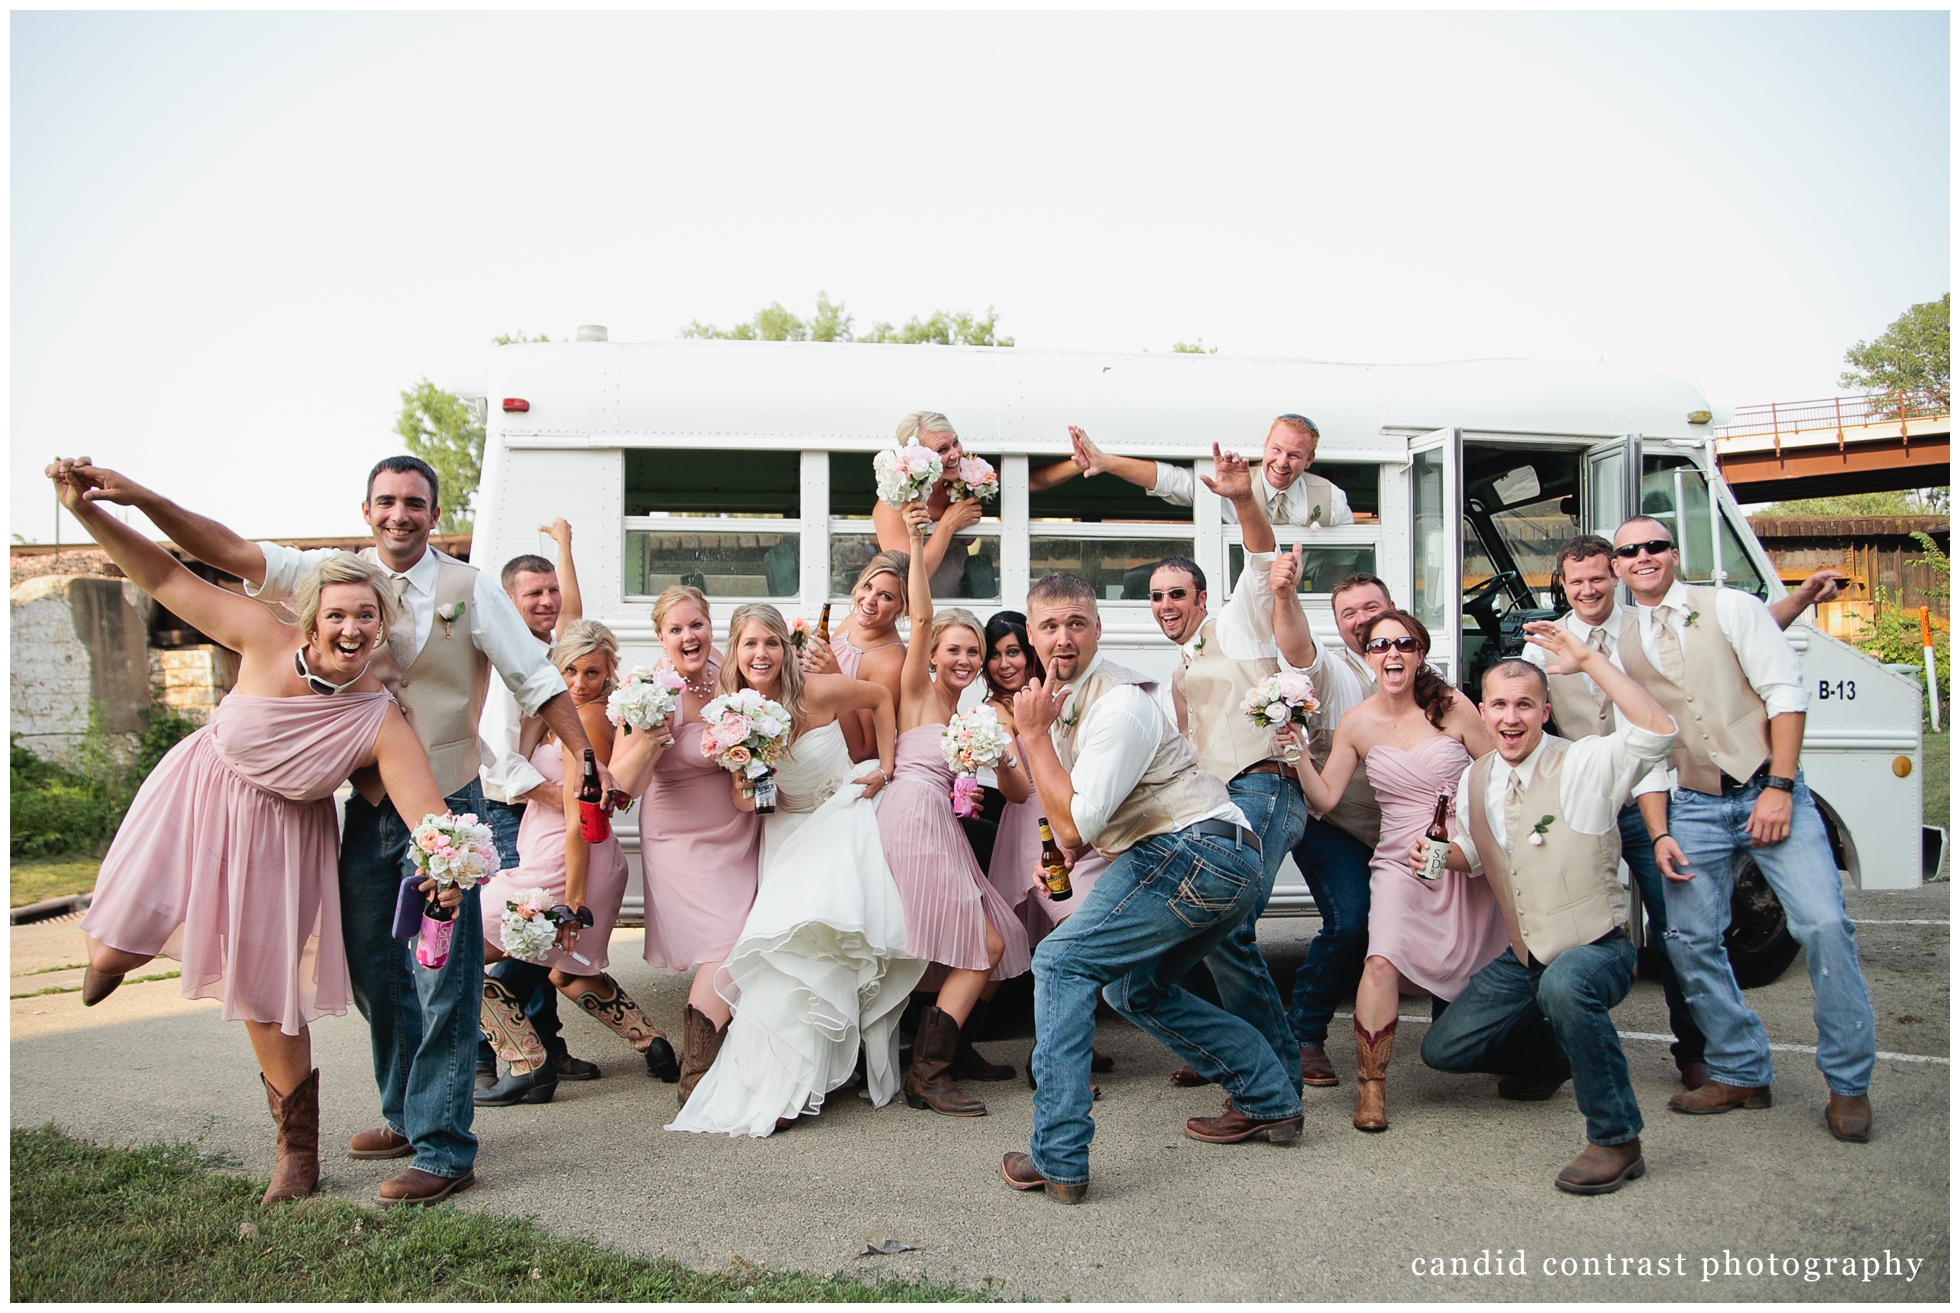 Bellevue Iowa wedding at The Shore Event Centre, fun wedding party photo, iowa wedding photographer candid contrast photography